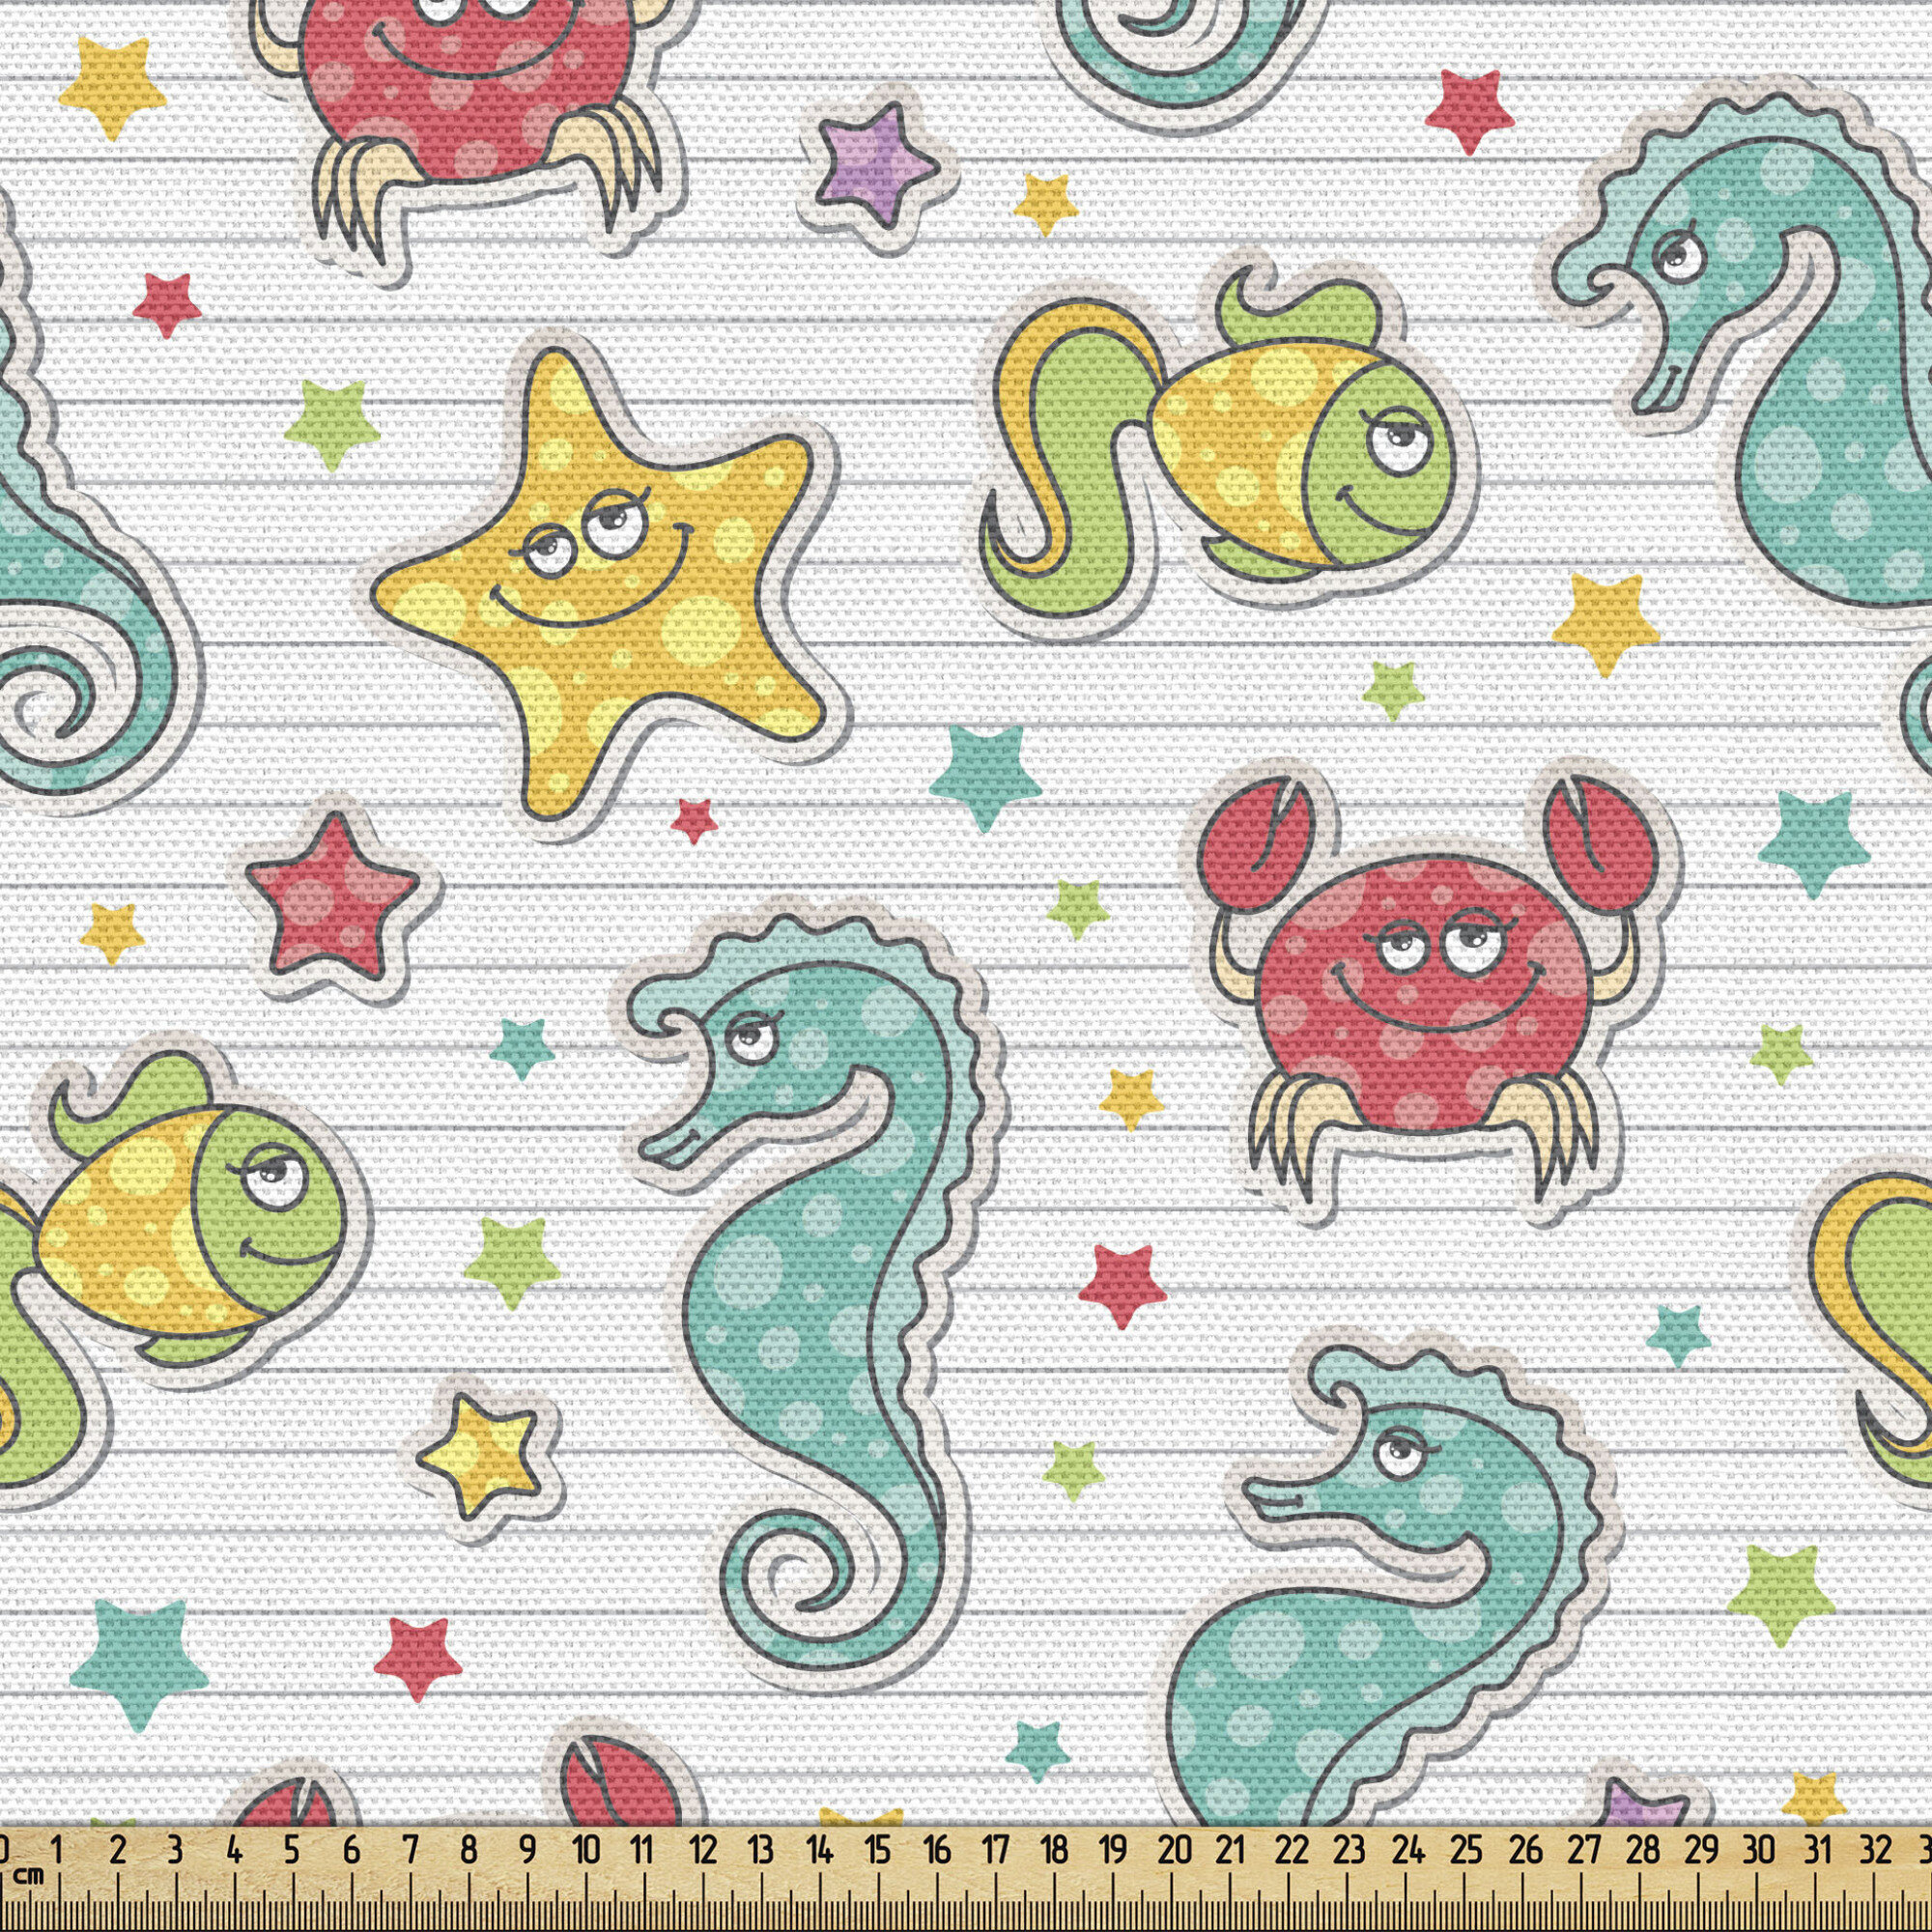 East Urban Home fab_44126_Ambesonne Cartoon Fabric By The Yard, Sea  Creatures With Seahorse Crabs Fish Aqua Drawing Style, Decorative Fabric  For Upholstery And Home Accents, Teal Mustard Dark Coral | Wayfair